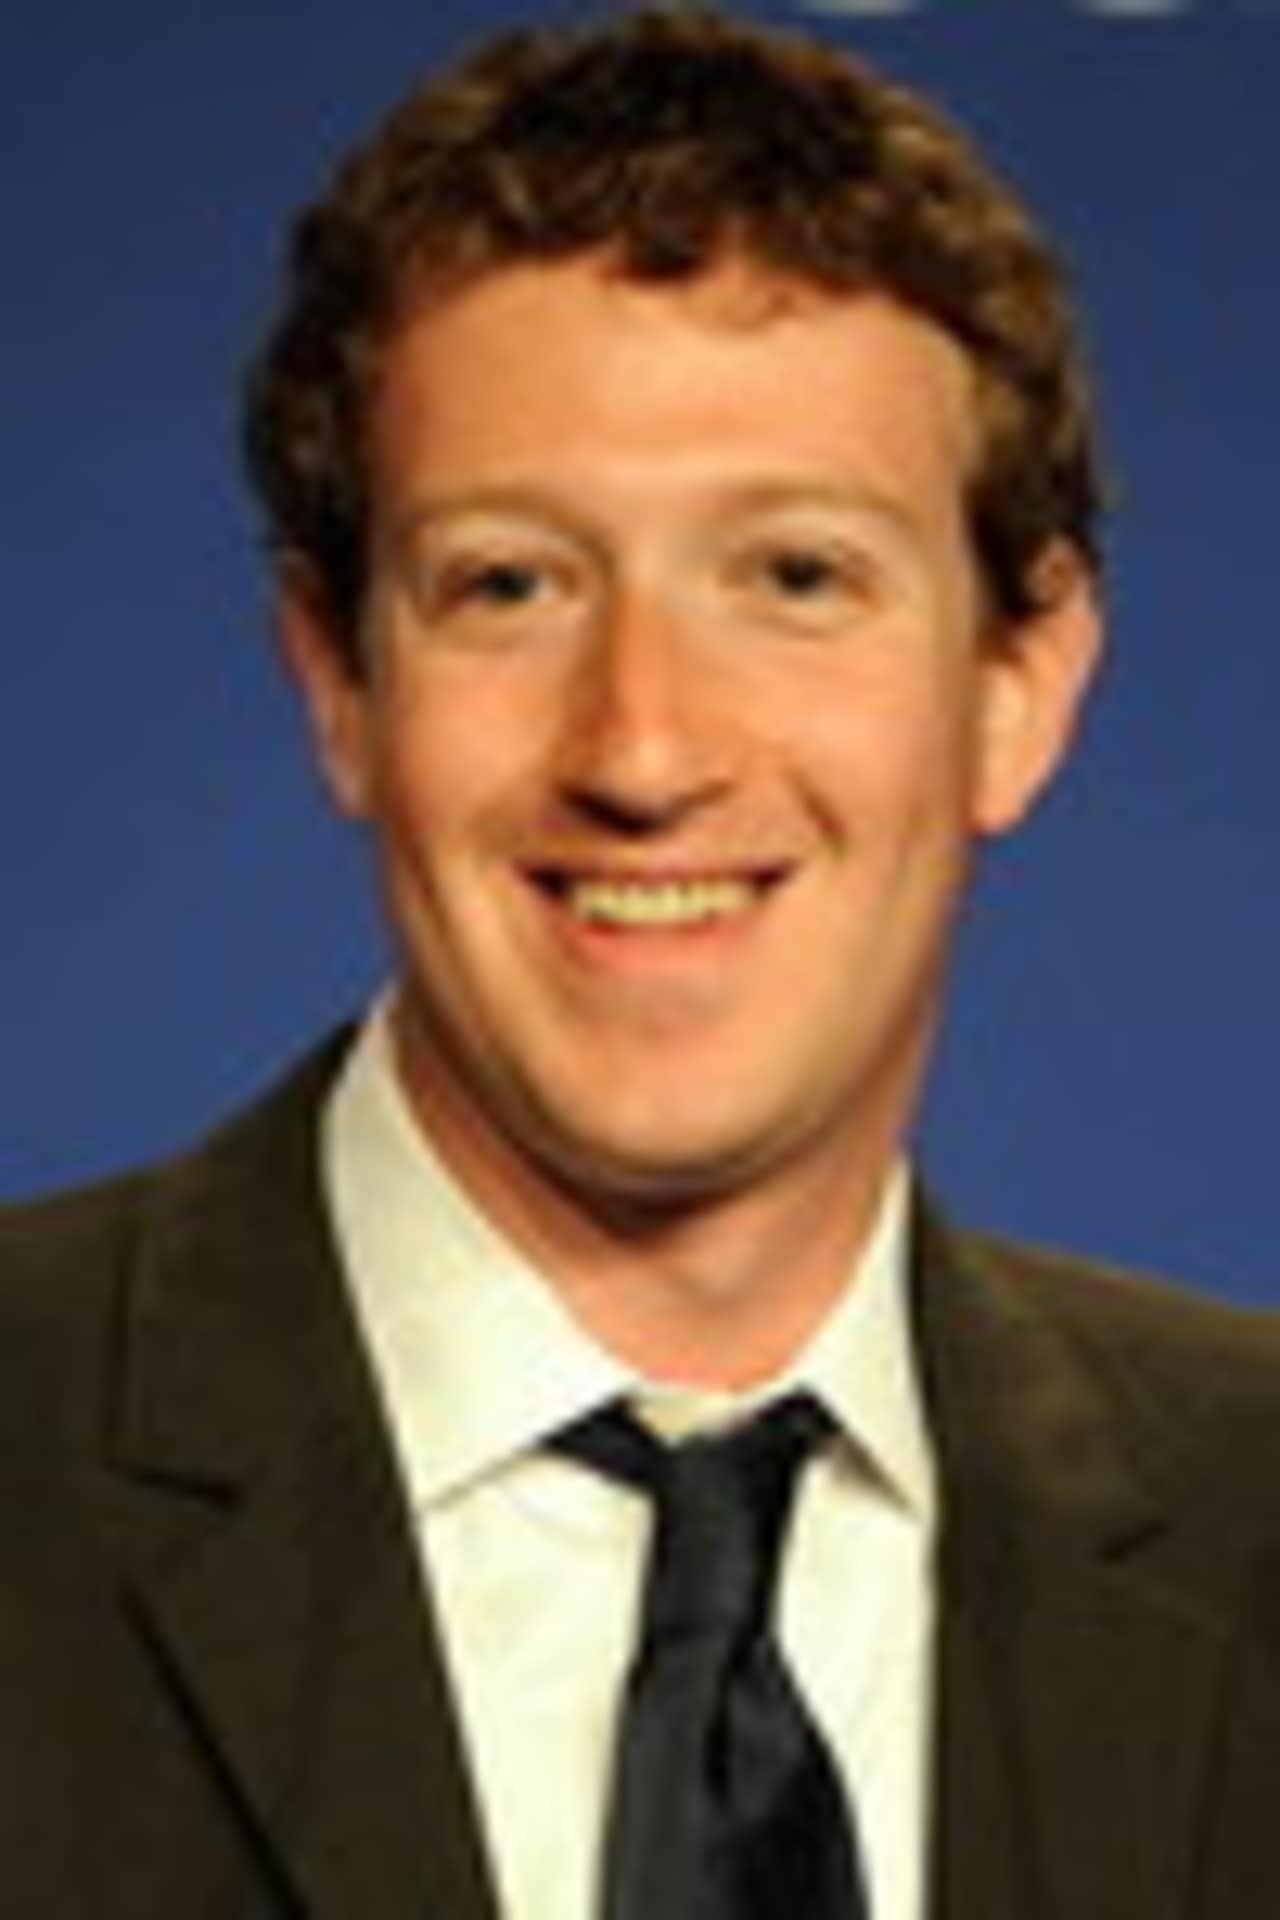 Facebook founder and former Dobbs Ferry resident Mark Zuckerberg was no.21 on Forbes' "Richest People on the Planet" list.